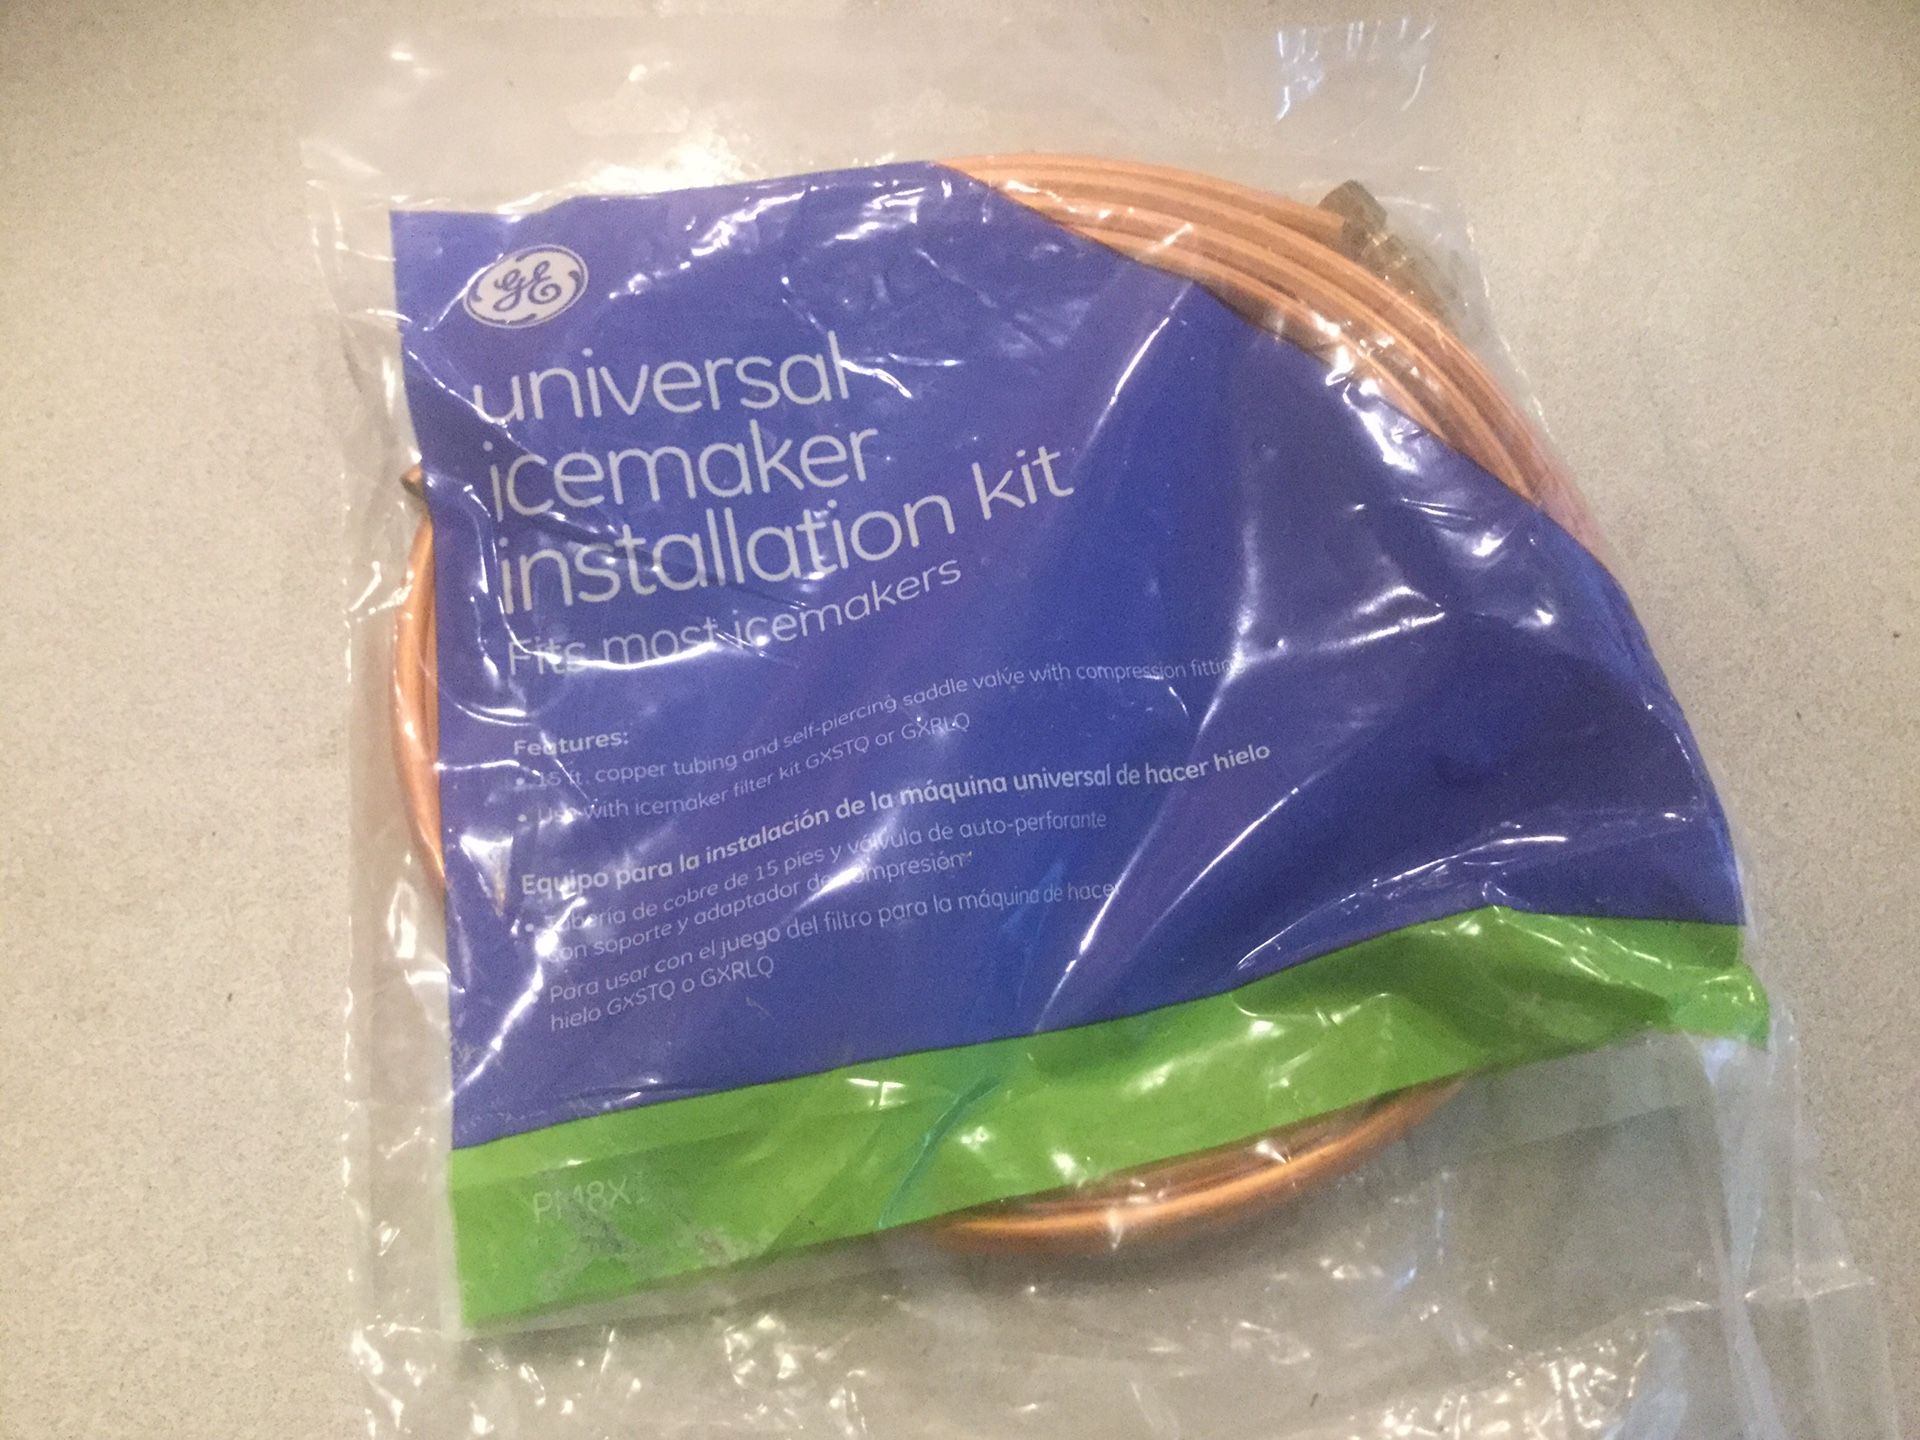 Universal ice-maker institution kit. Brand new never opened or used